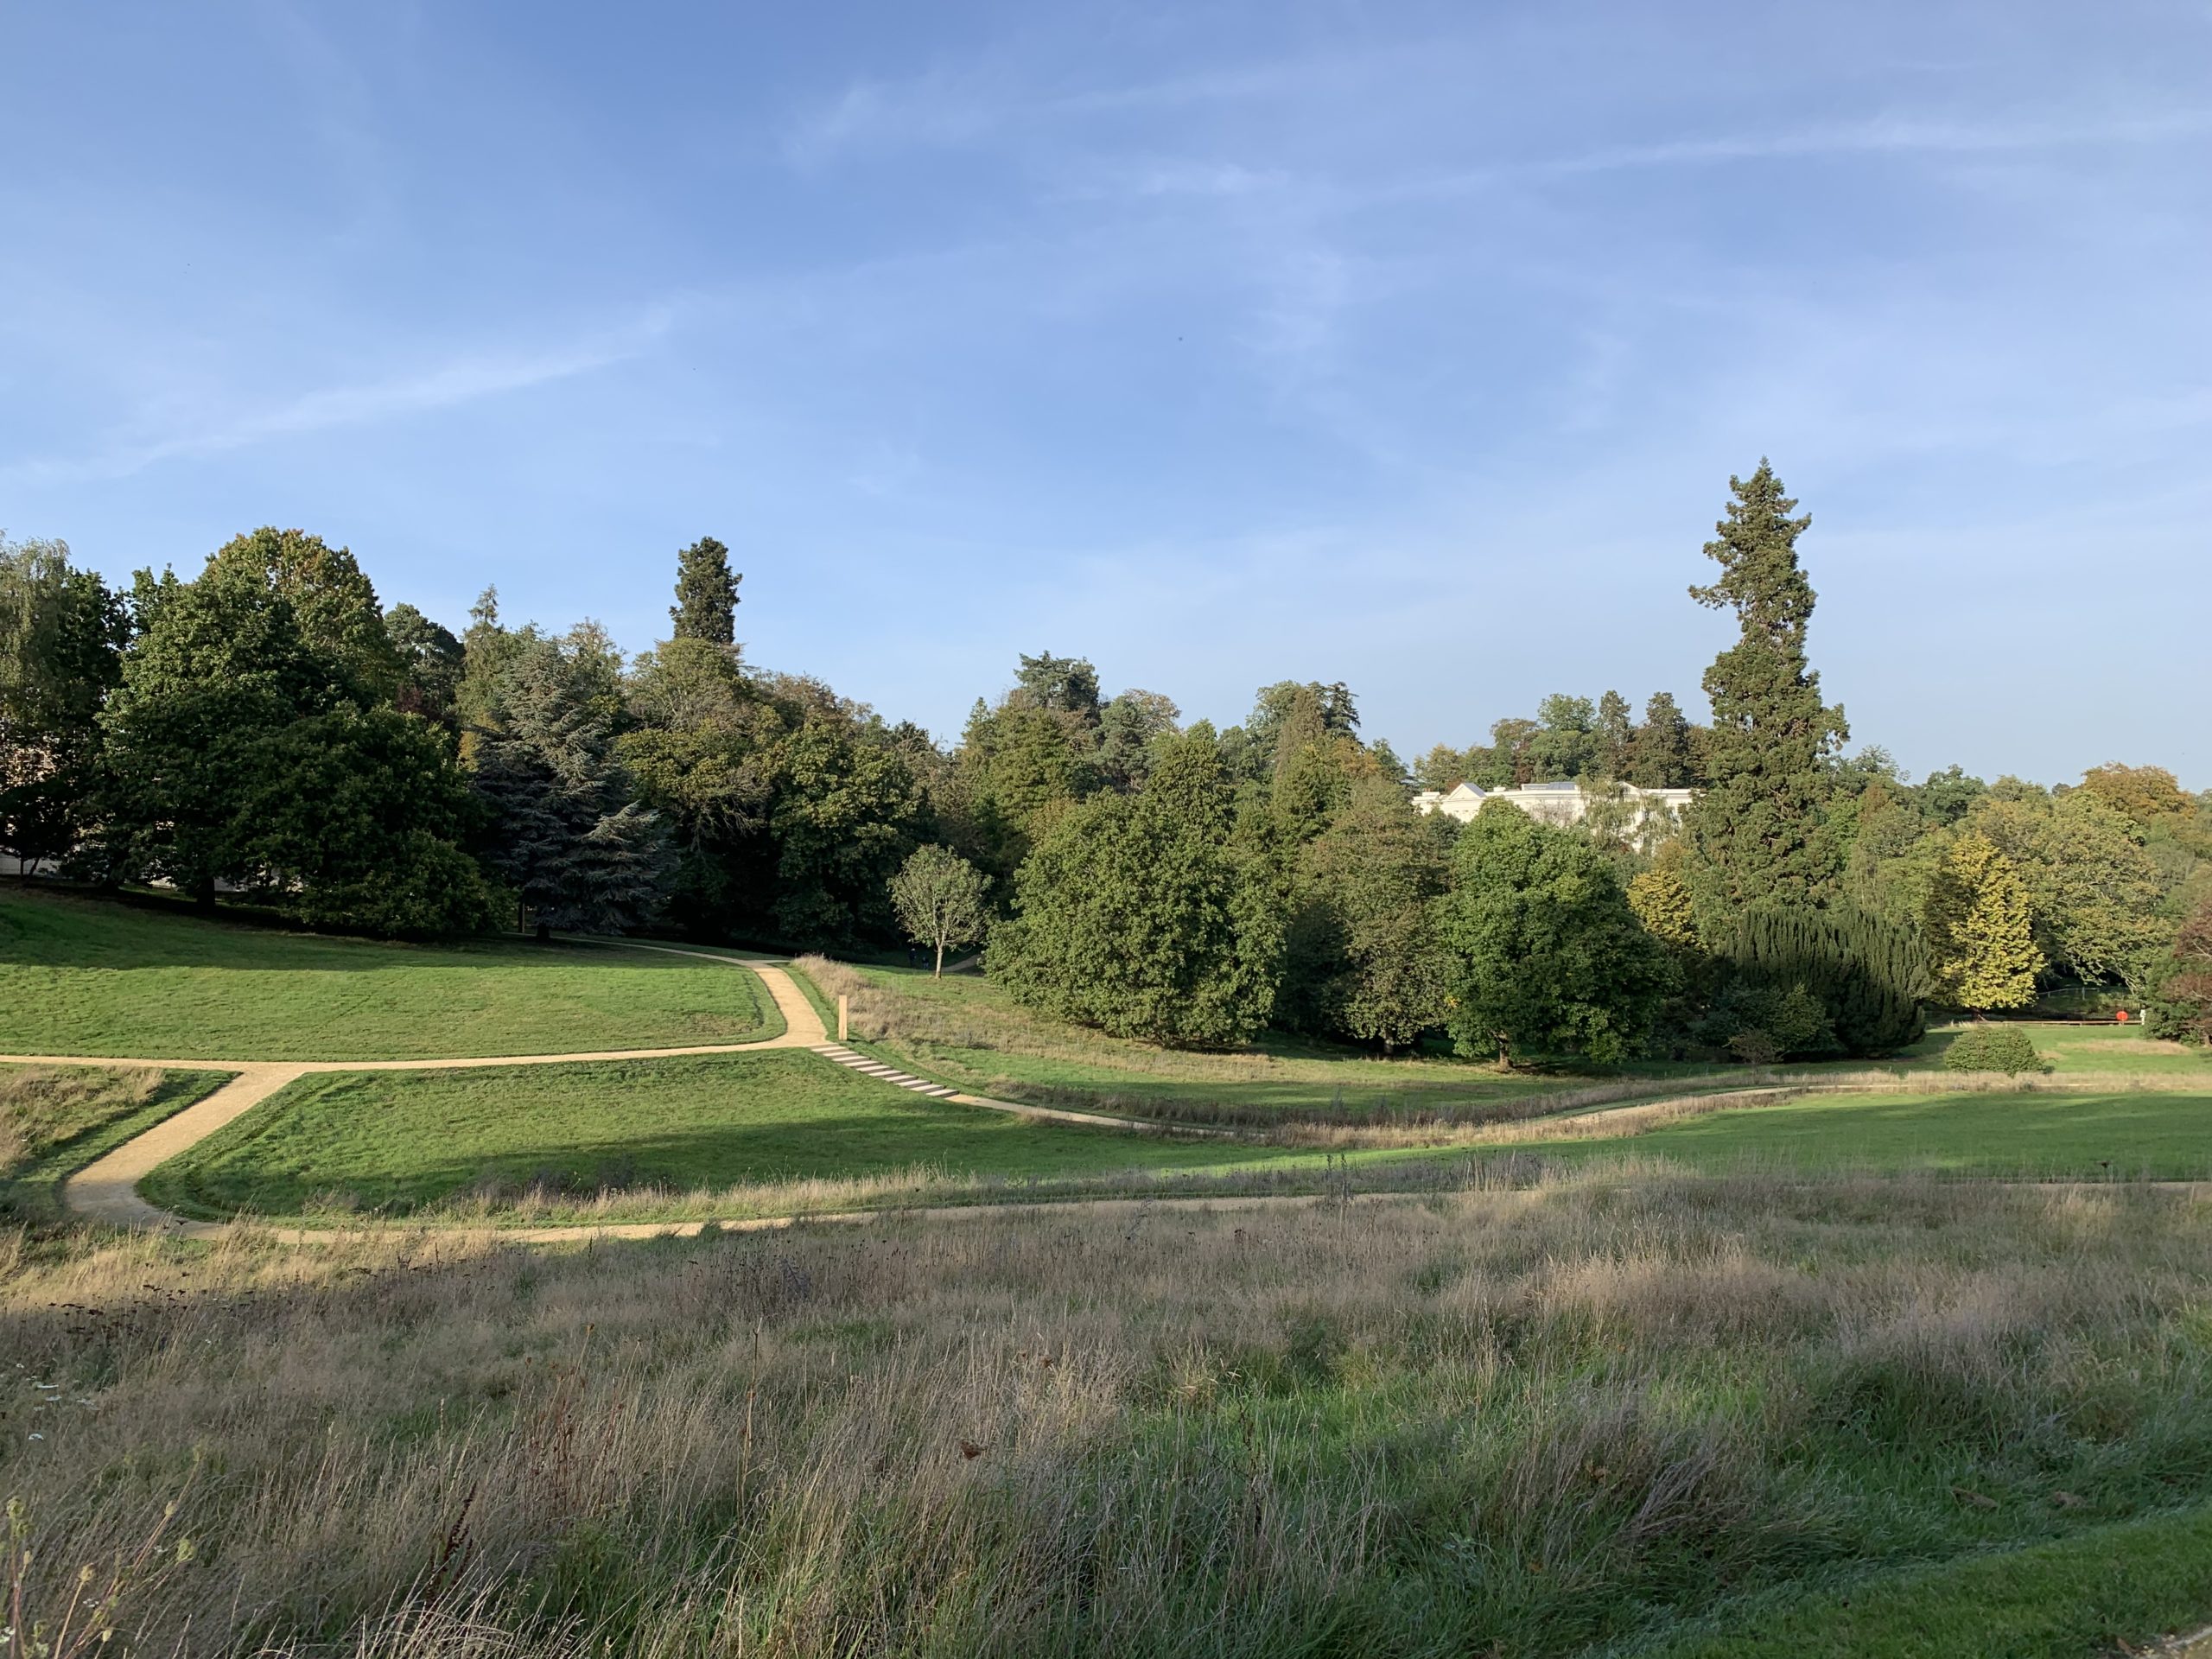 Photo of a landscaped parkland with a glimpse of a white mansion hose on the horizon